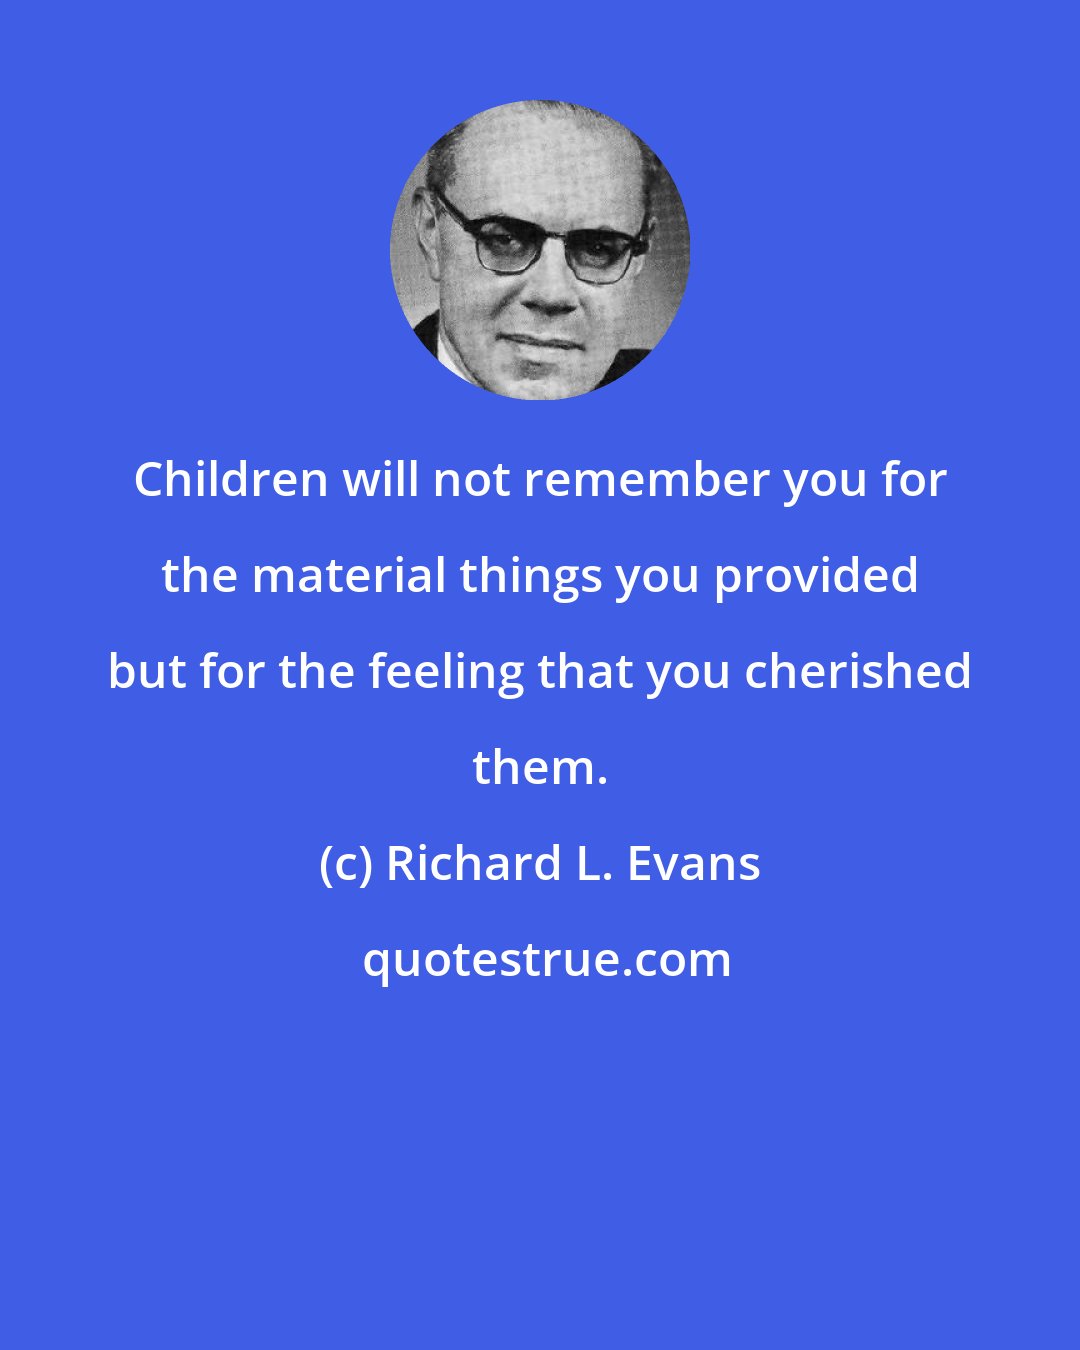 Richard L. Evans: Children will not remember you for the material things you provided but for the feeling that you cherished them.